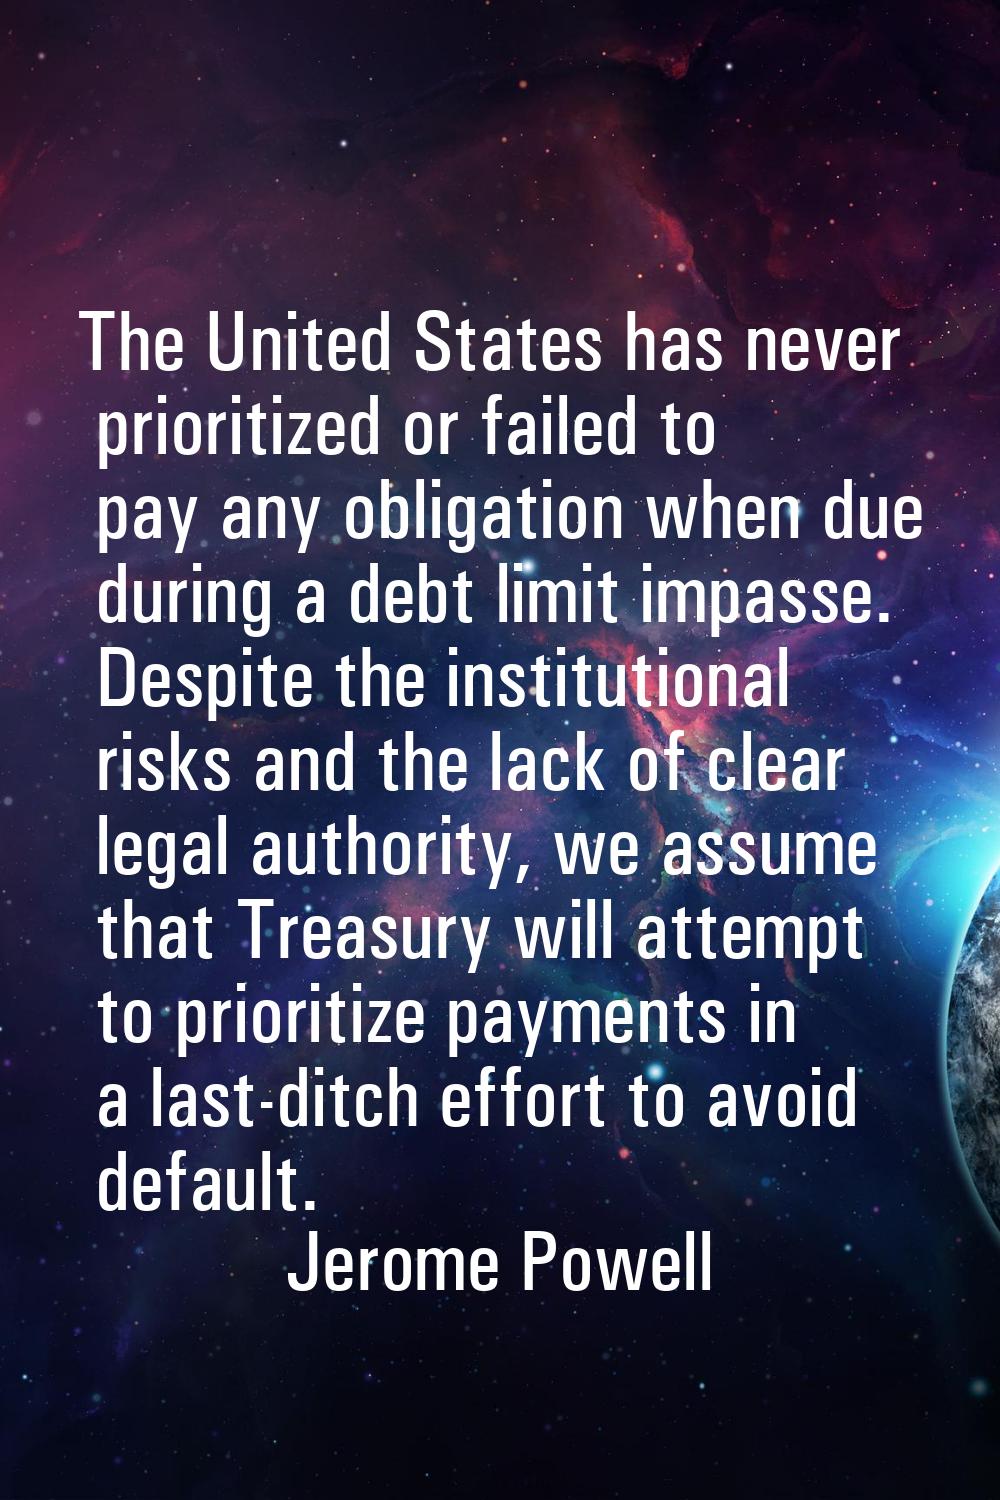 The United States has never prioritized or failed to pay any obligation when due during a debt limi